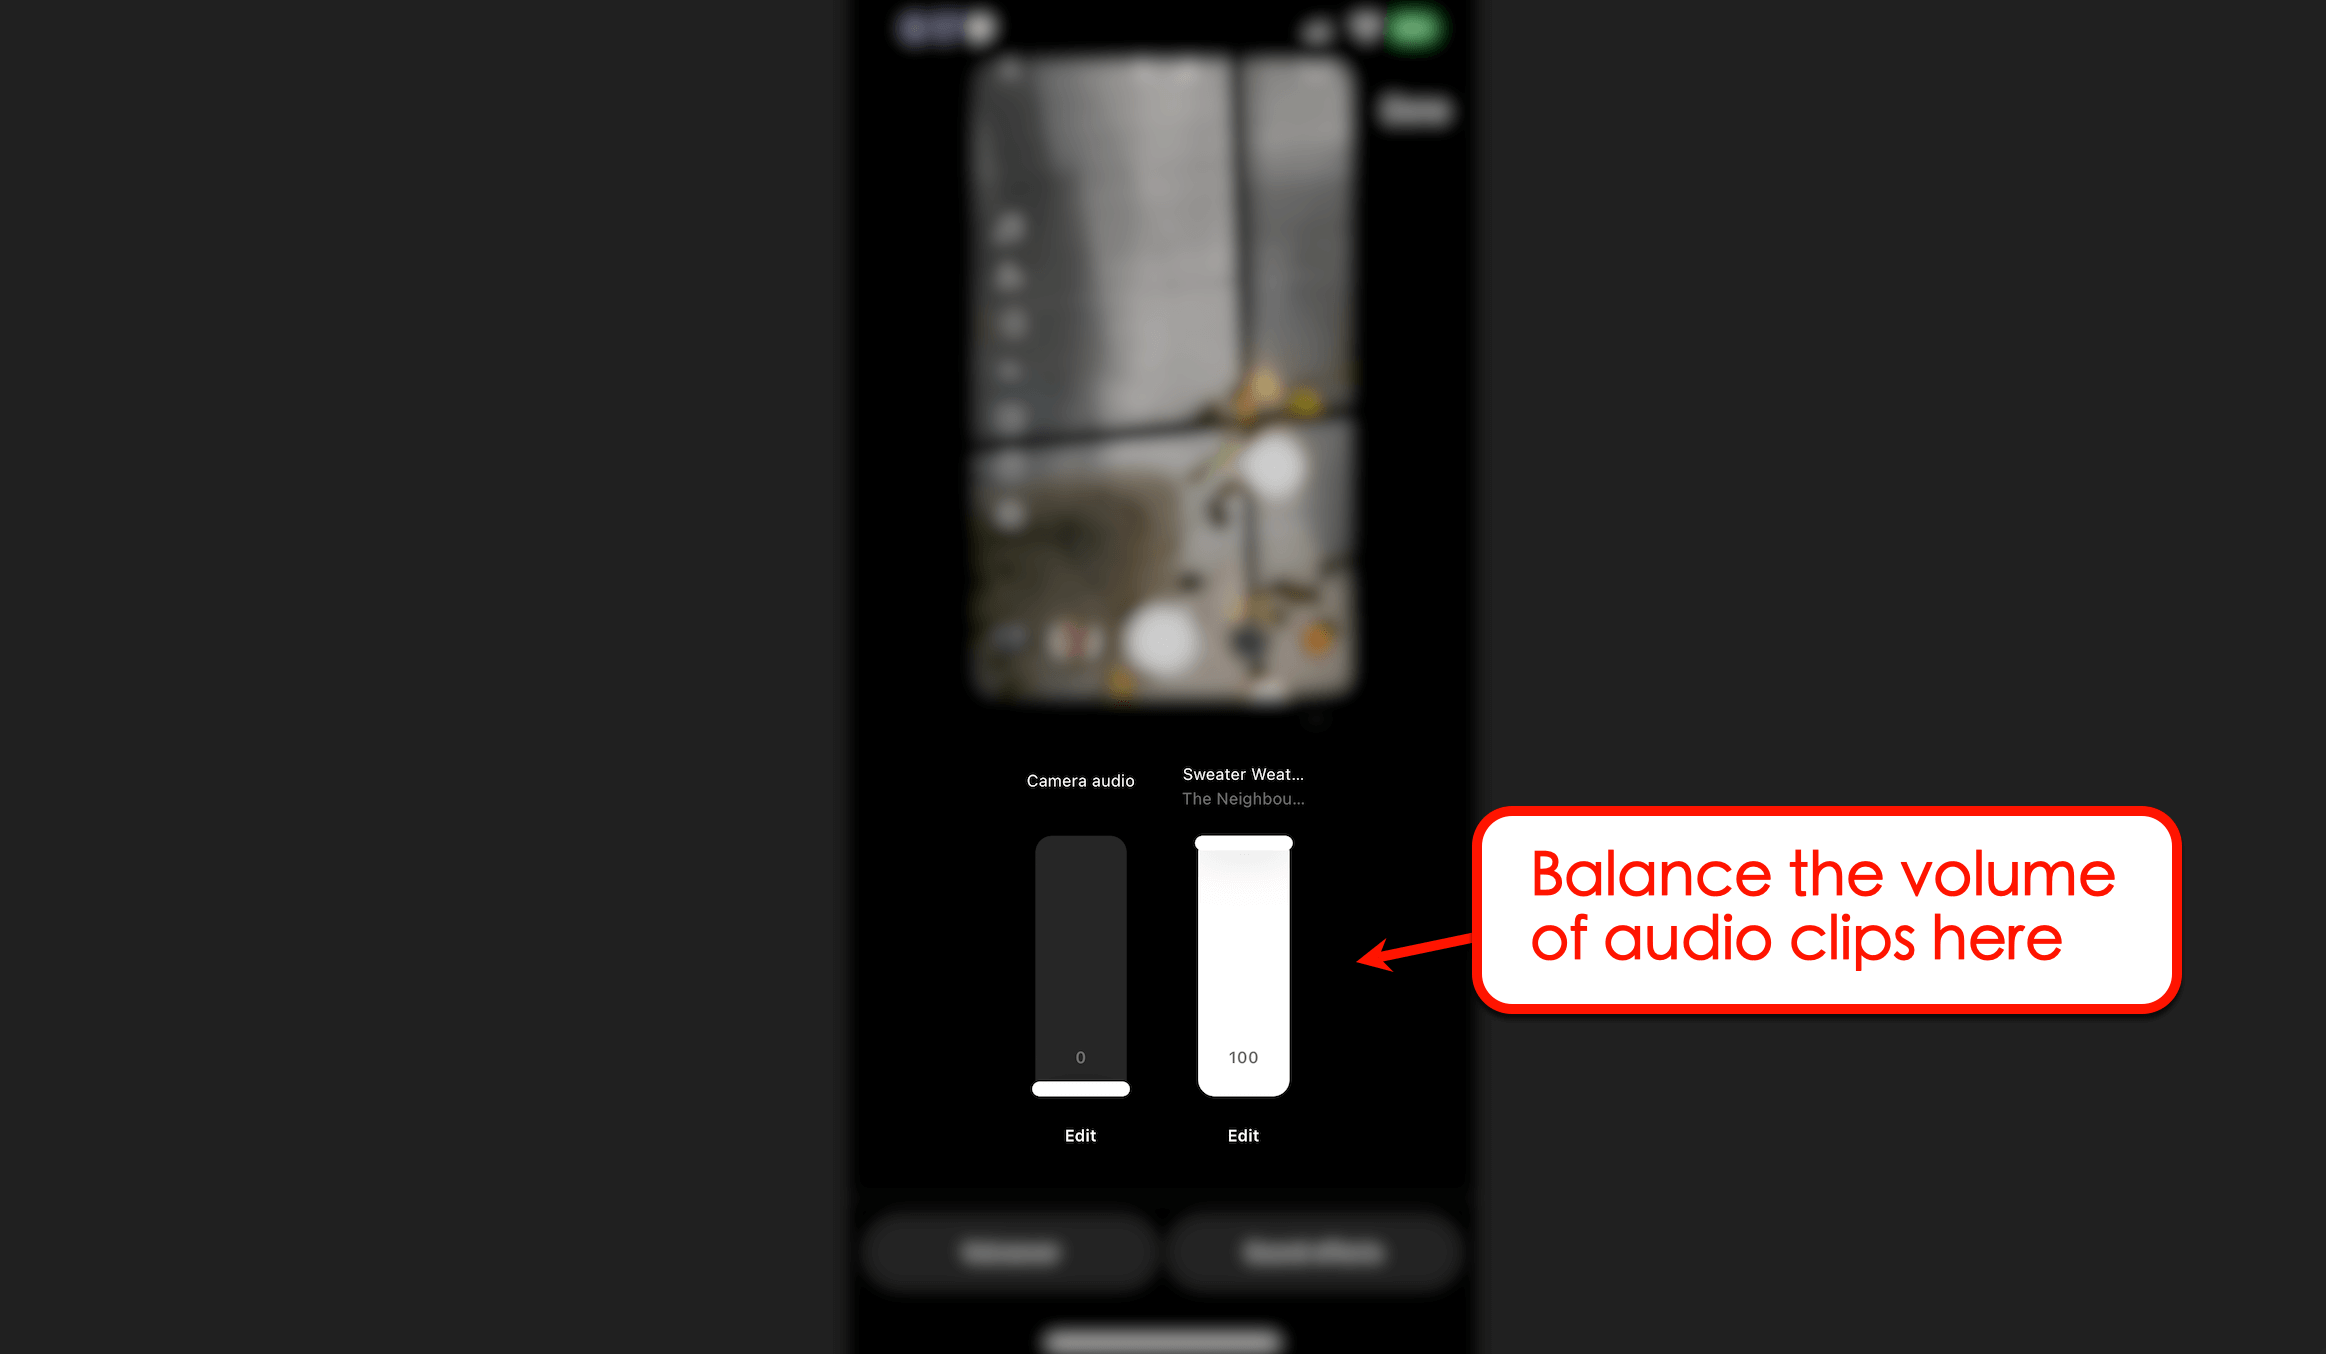 Balance the volume of the audio clips